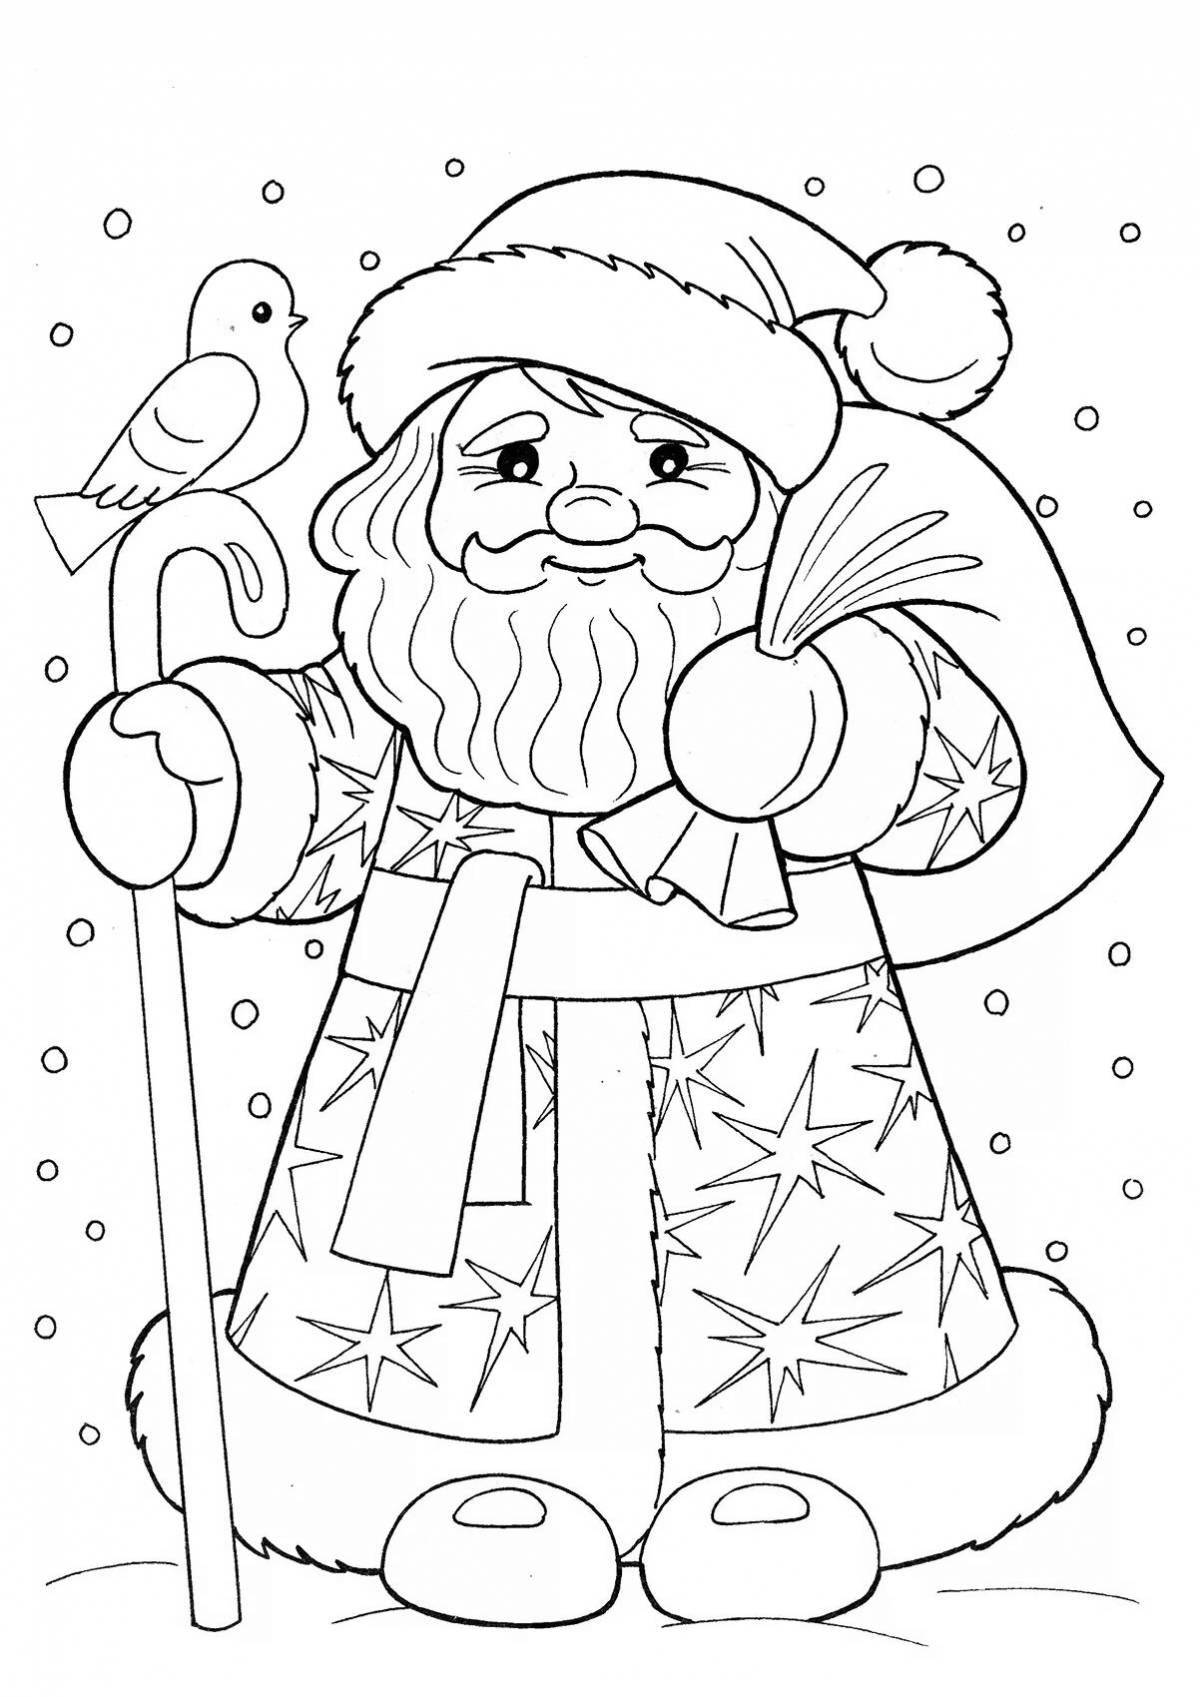 Adorable Santa Claus coloring book for 2-3 year olds